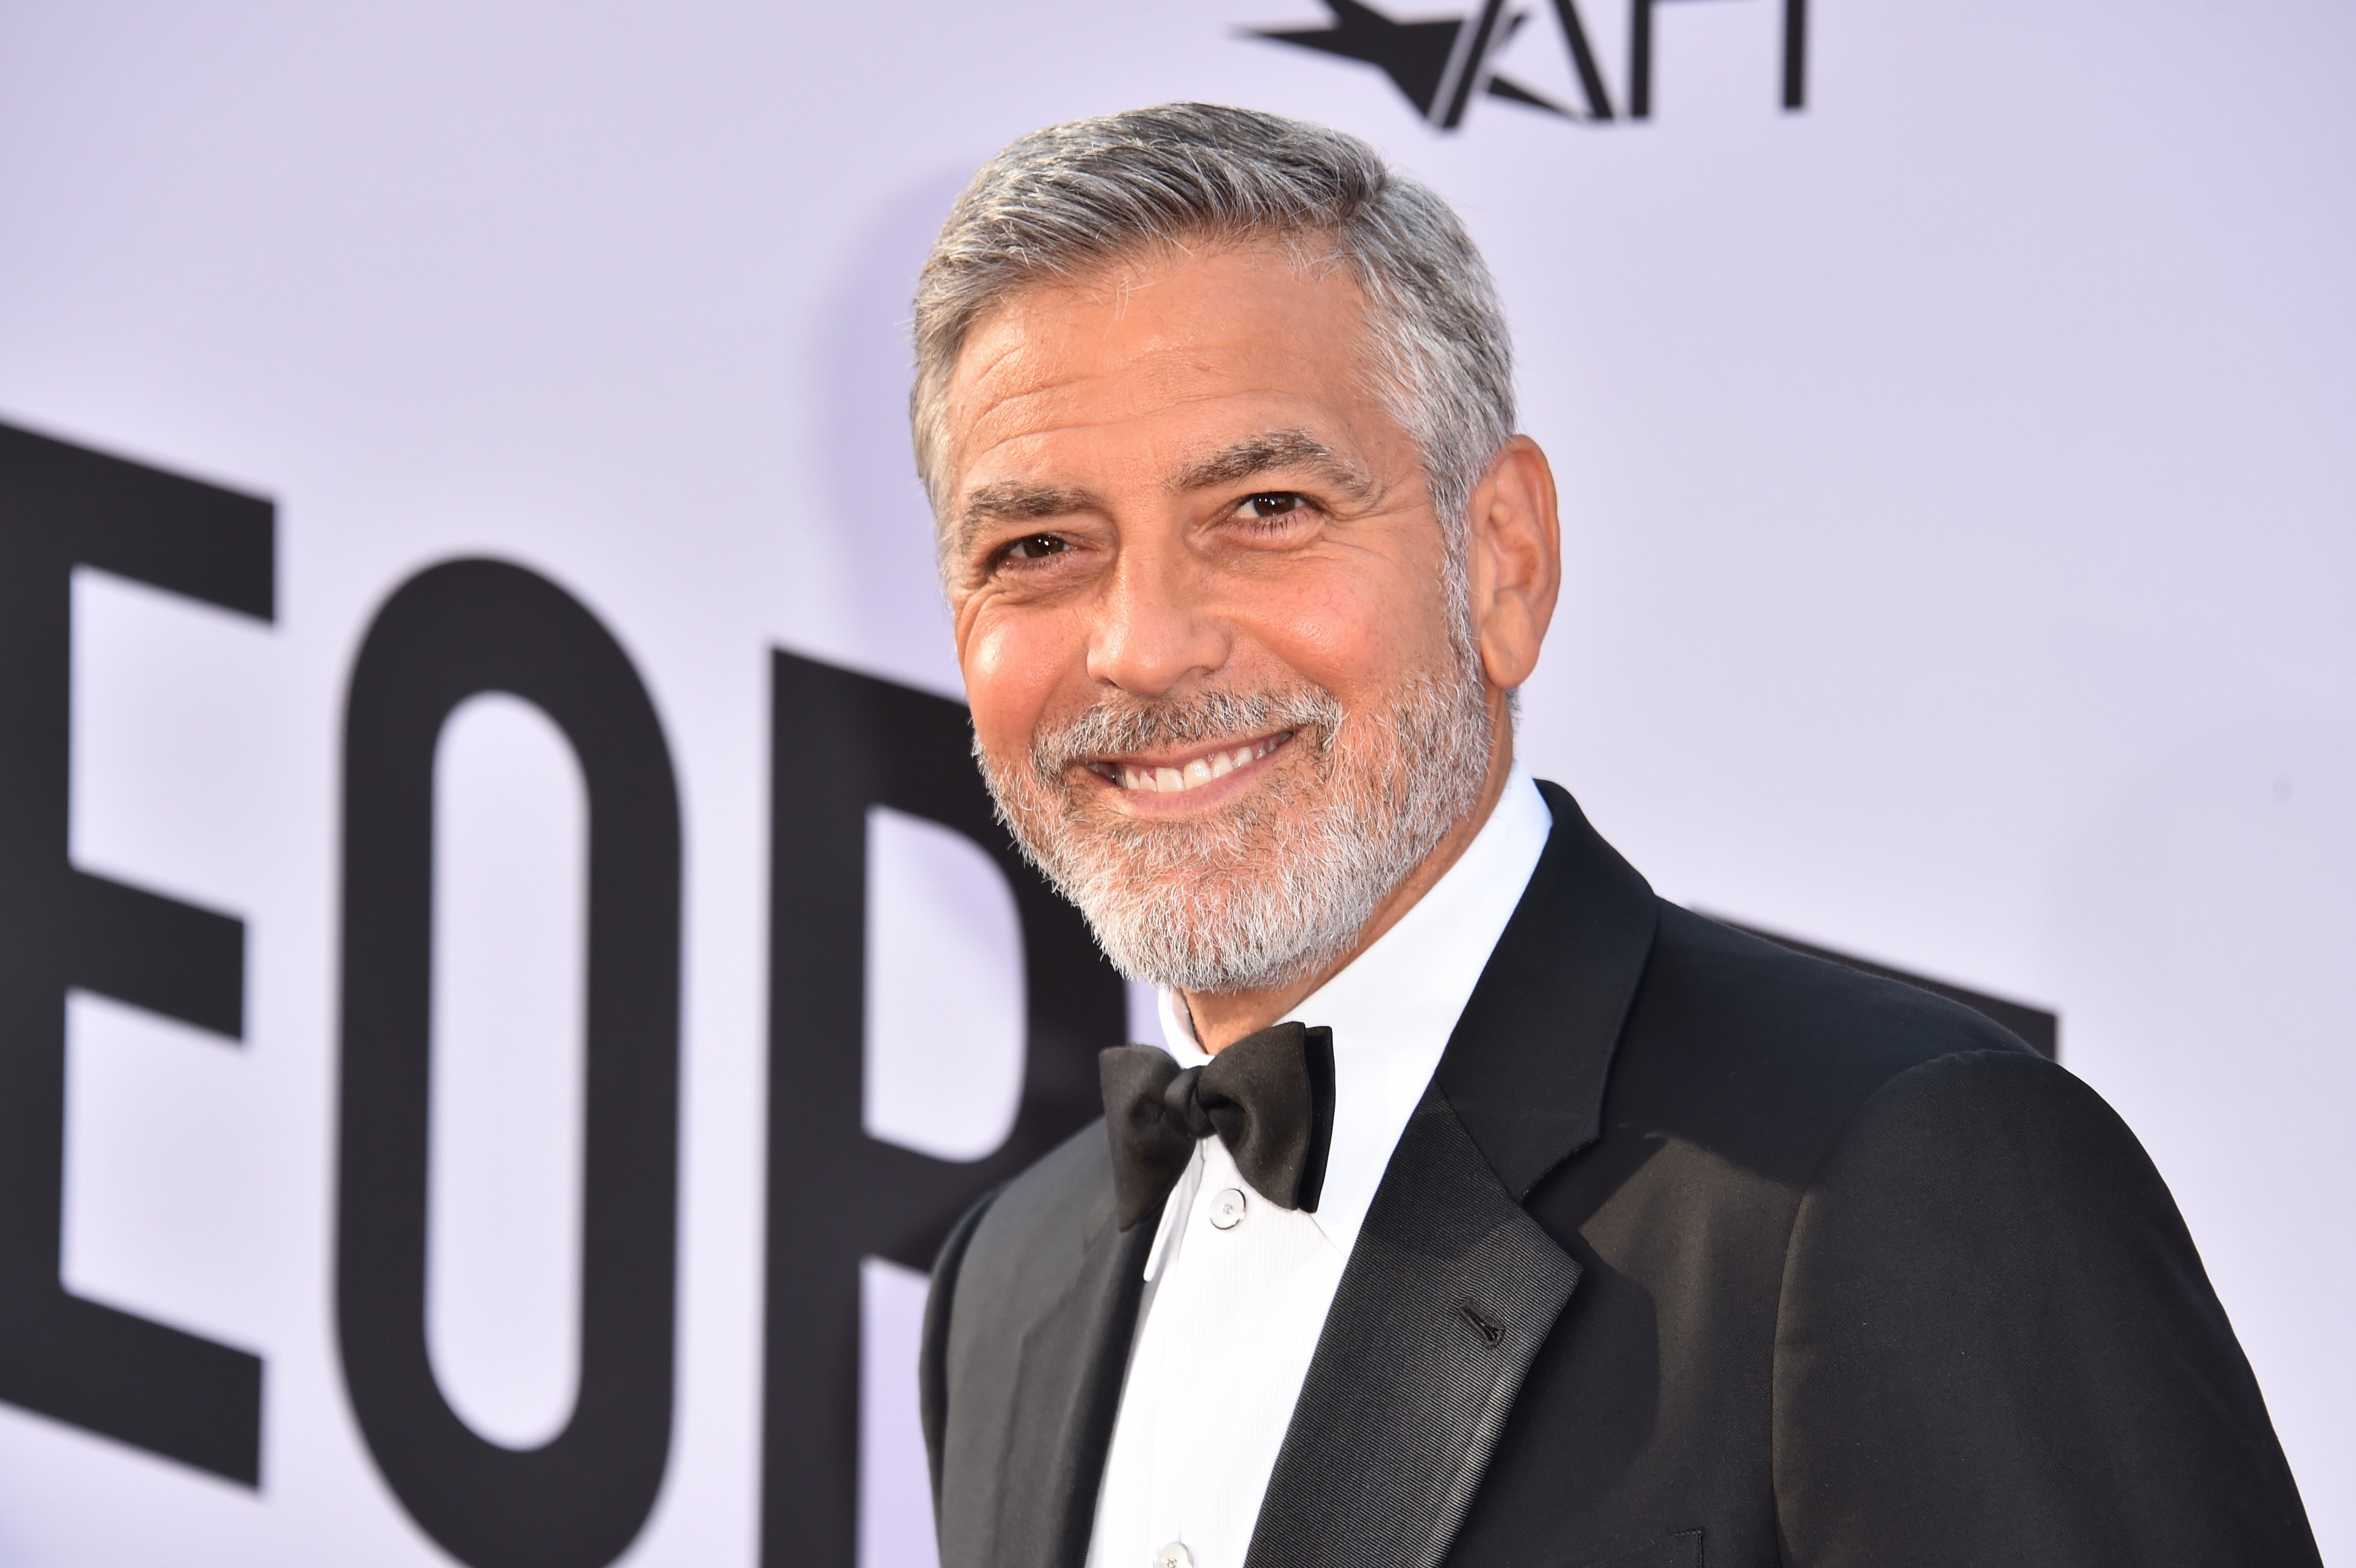 George Clooney faces criticism over nanny comments